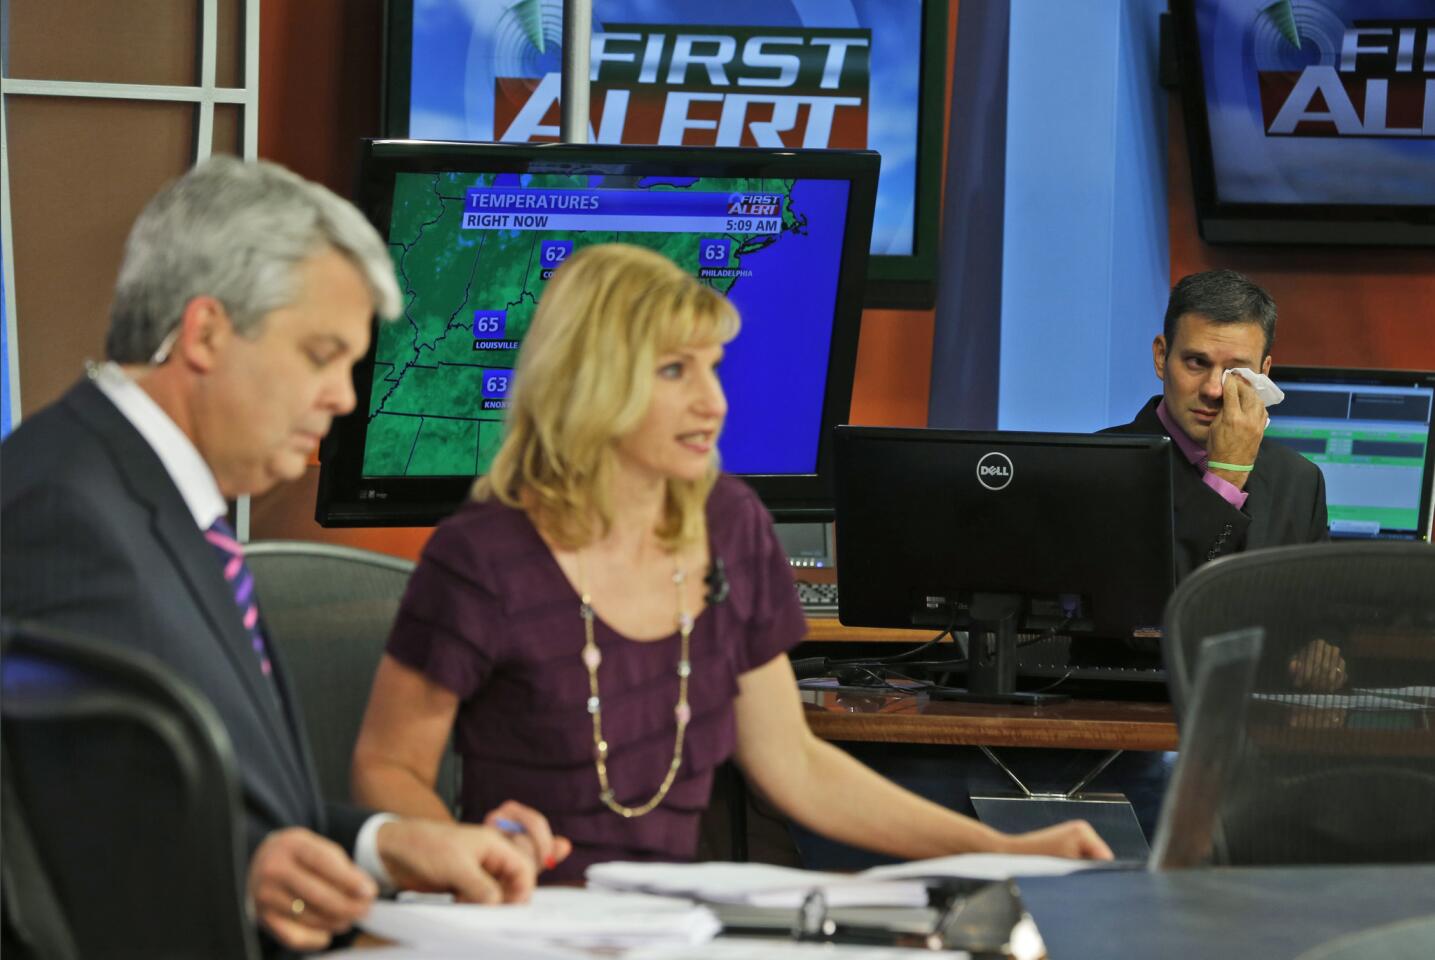 WDBJ meteorologist Leo Hirsbrunner, right, gets emotional during the early morning newscast as anchors deliver the news Aug. 27, 2015, the day after a reporter and cameraman were killed during a live broadcast.